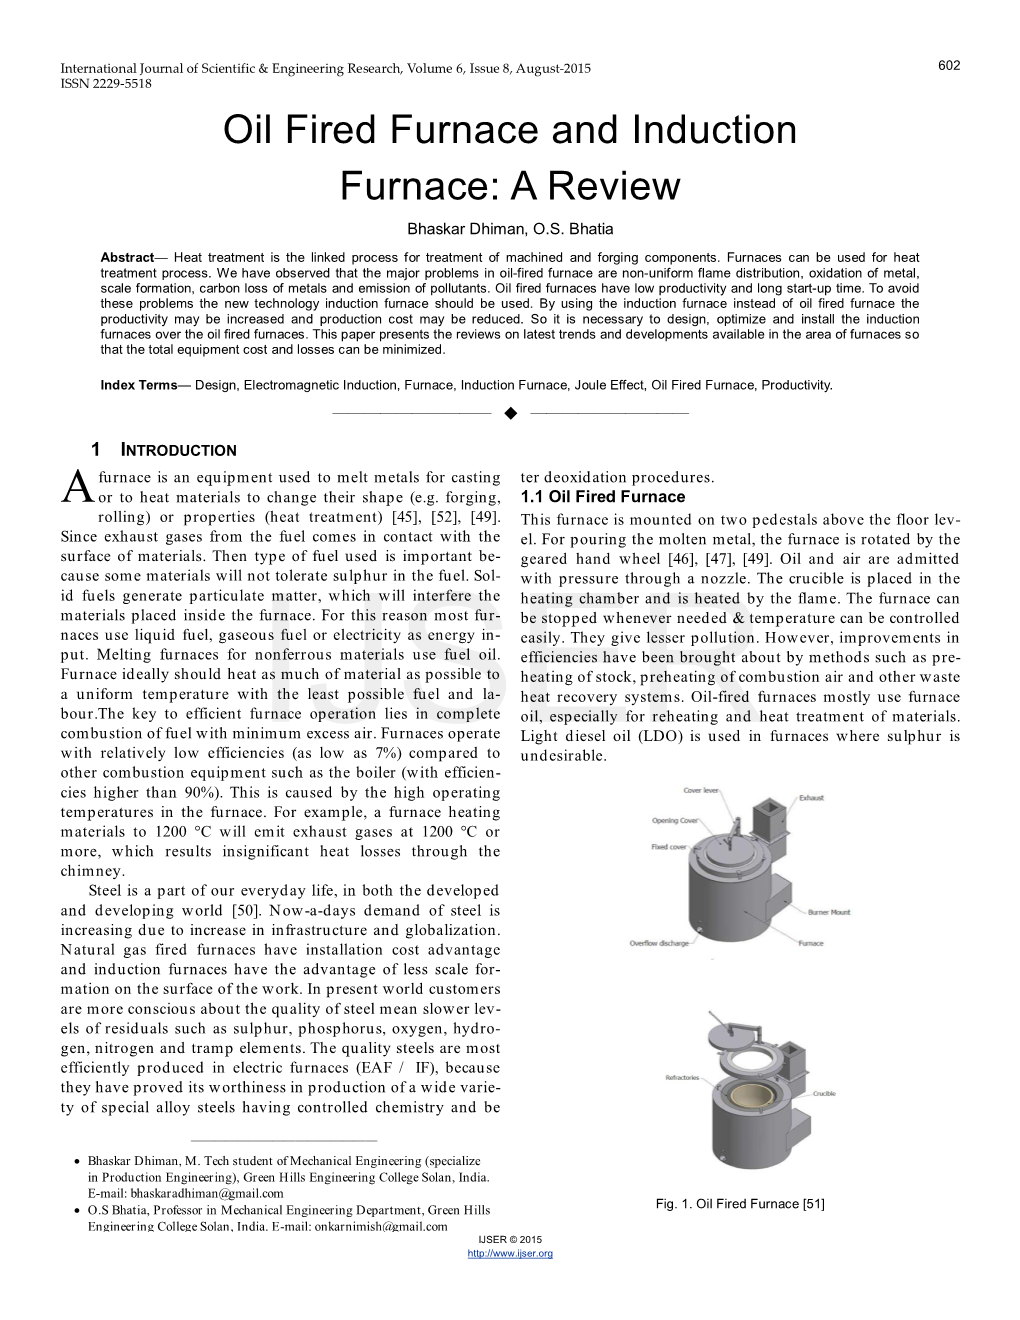 Oil Fired Furnace and Induction Furnace: a Review Bhaskar Dhiman, O.S